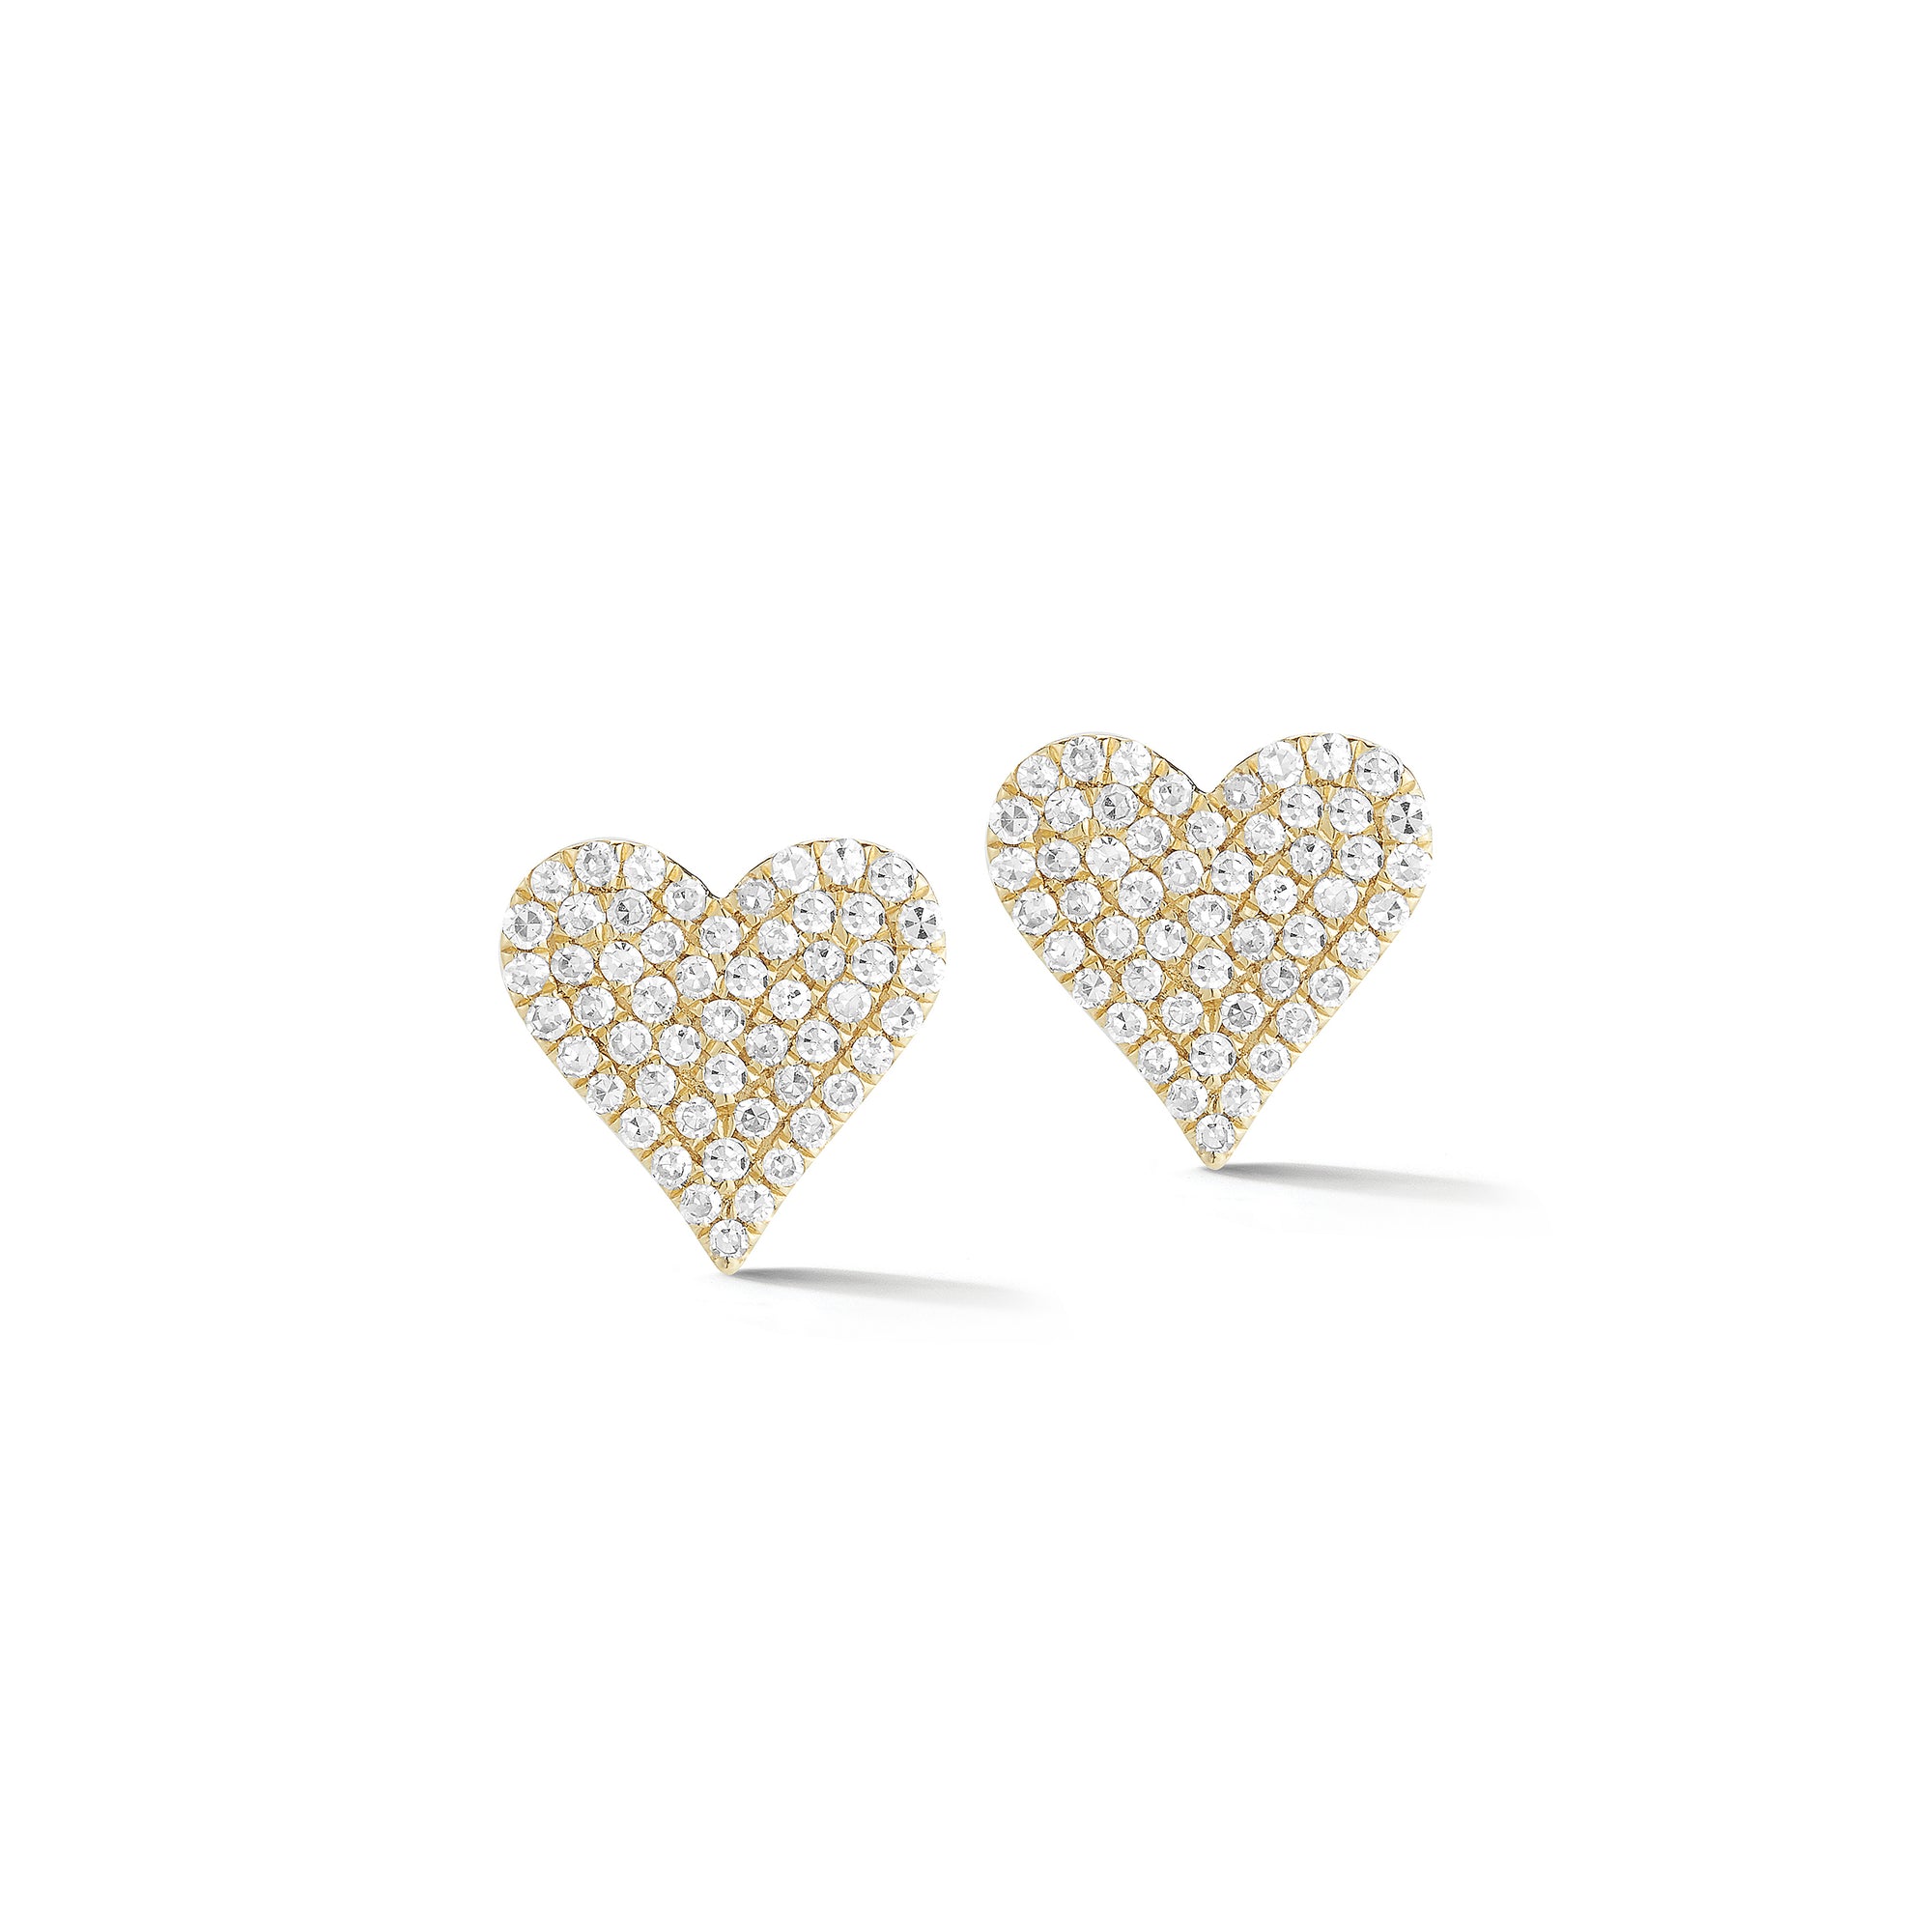 Diamond Heart Earrings -14k yellow gold weighing 1.56 grams - 106 round pave-set diamonds totaling 0.33 carats.